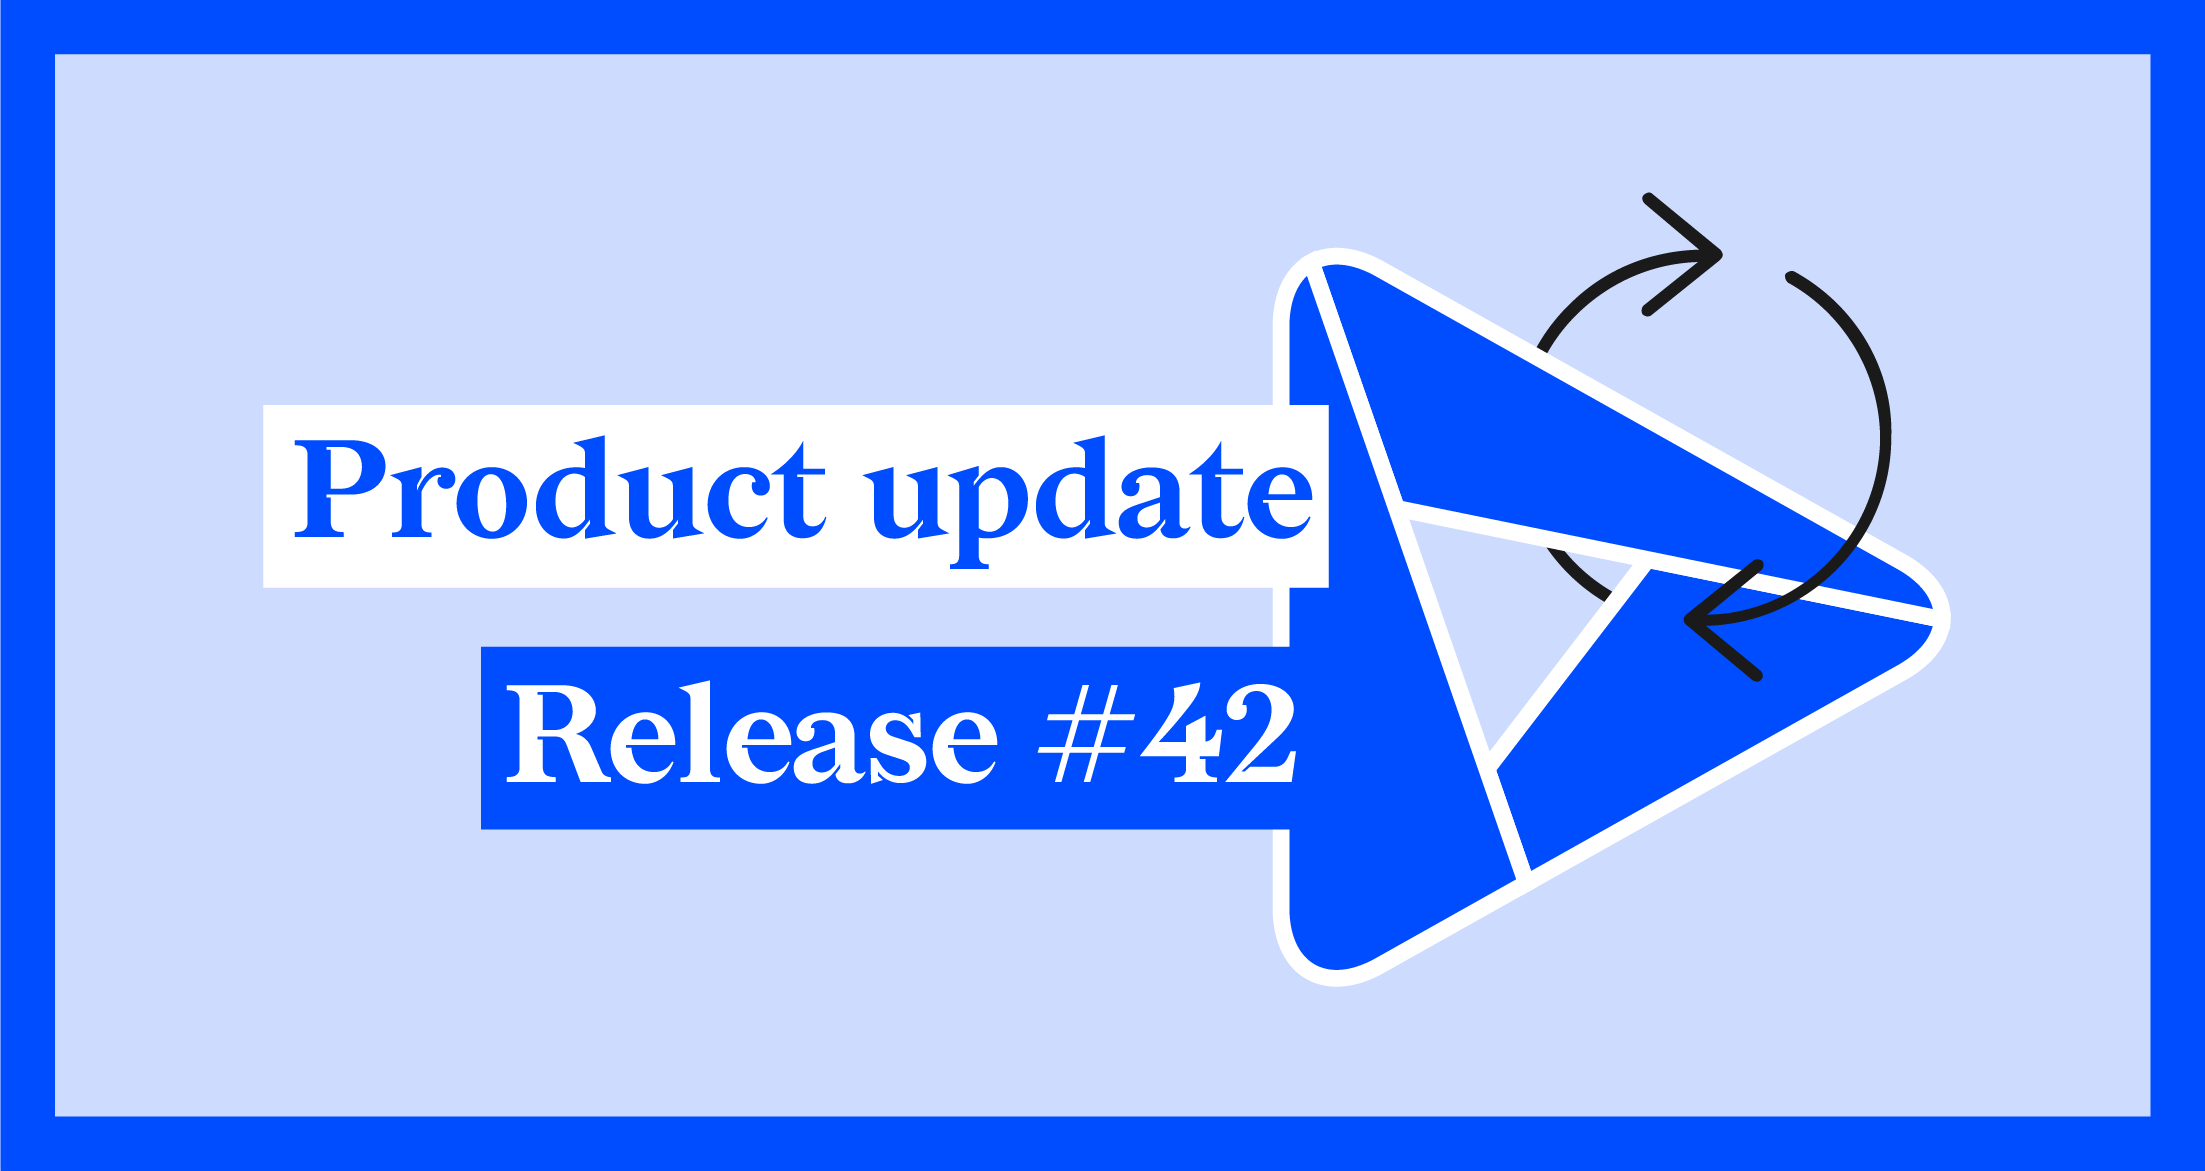 Datylon release R42 provides new features that speed up your chart design